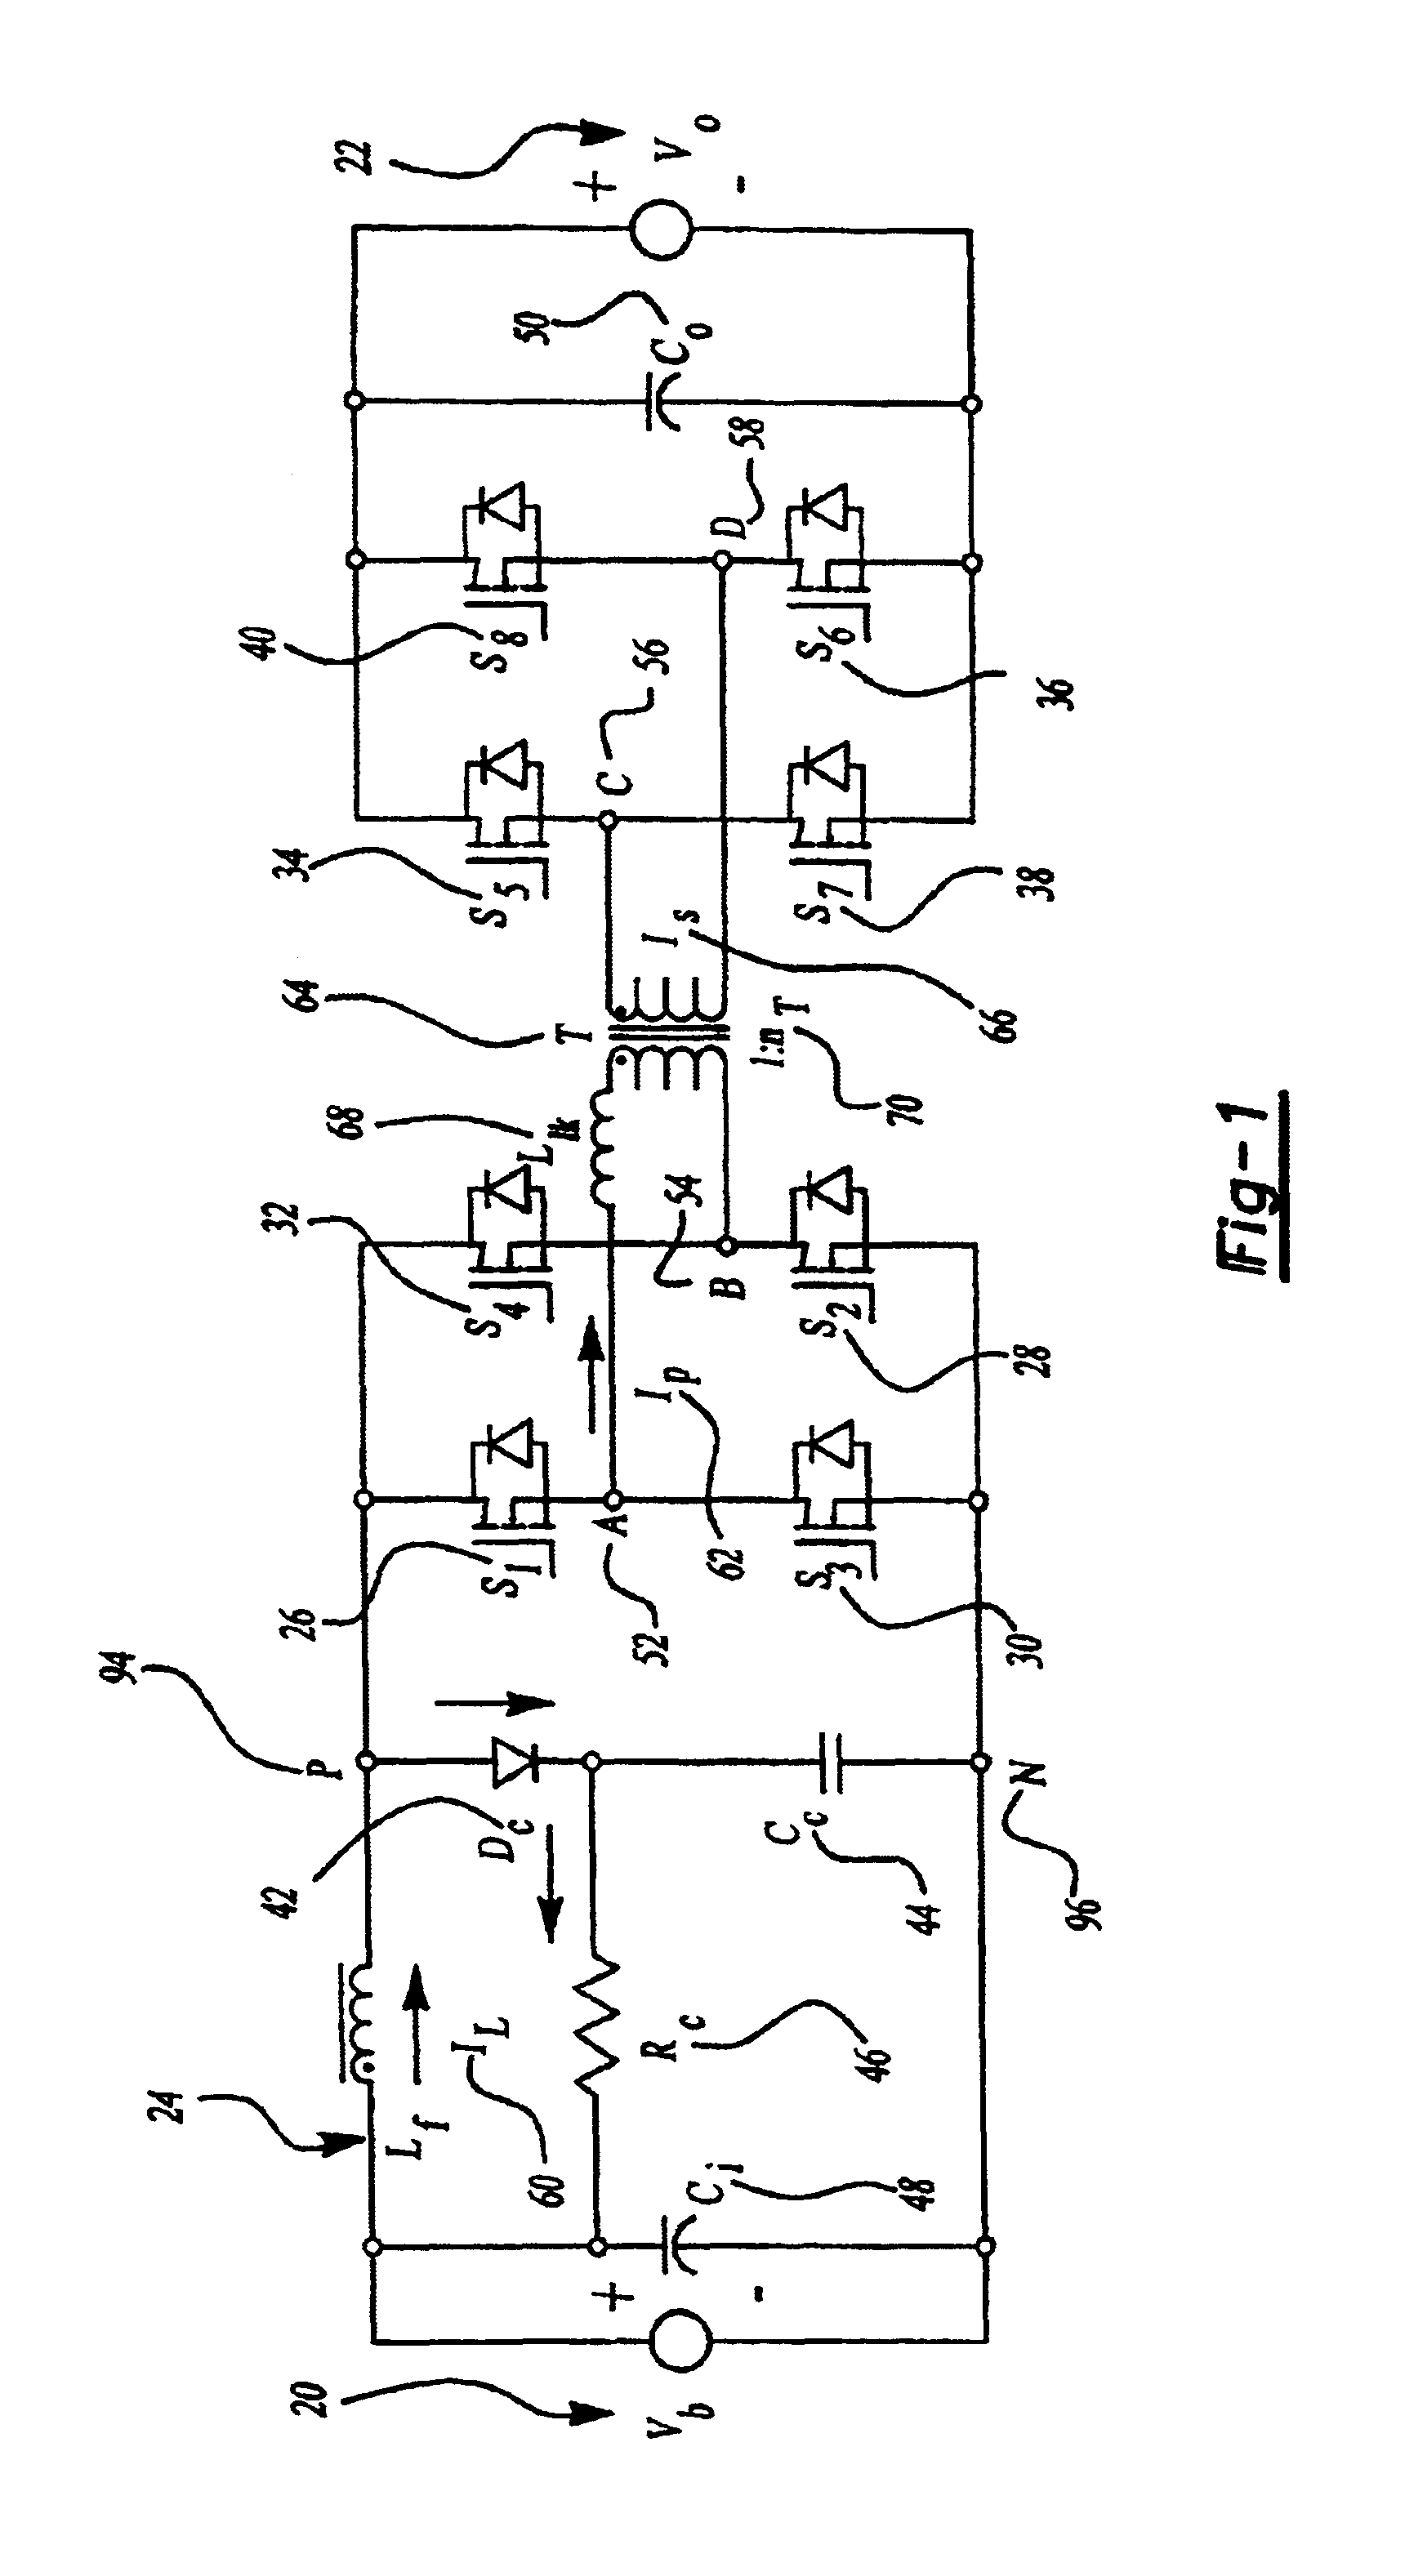 Accelerated commutation for passive clamp isolated boost converters